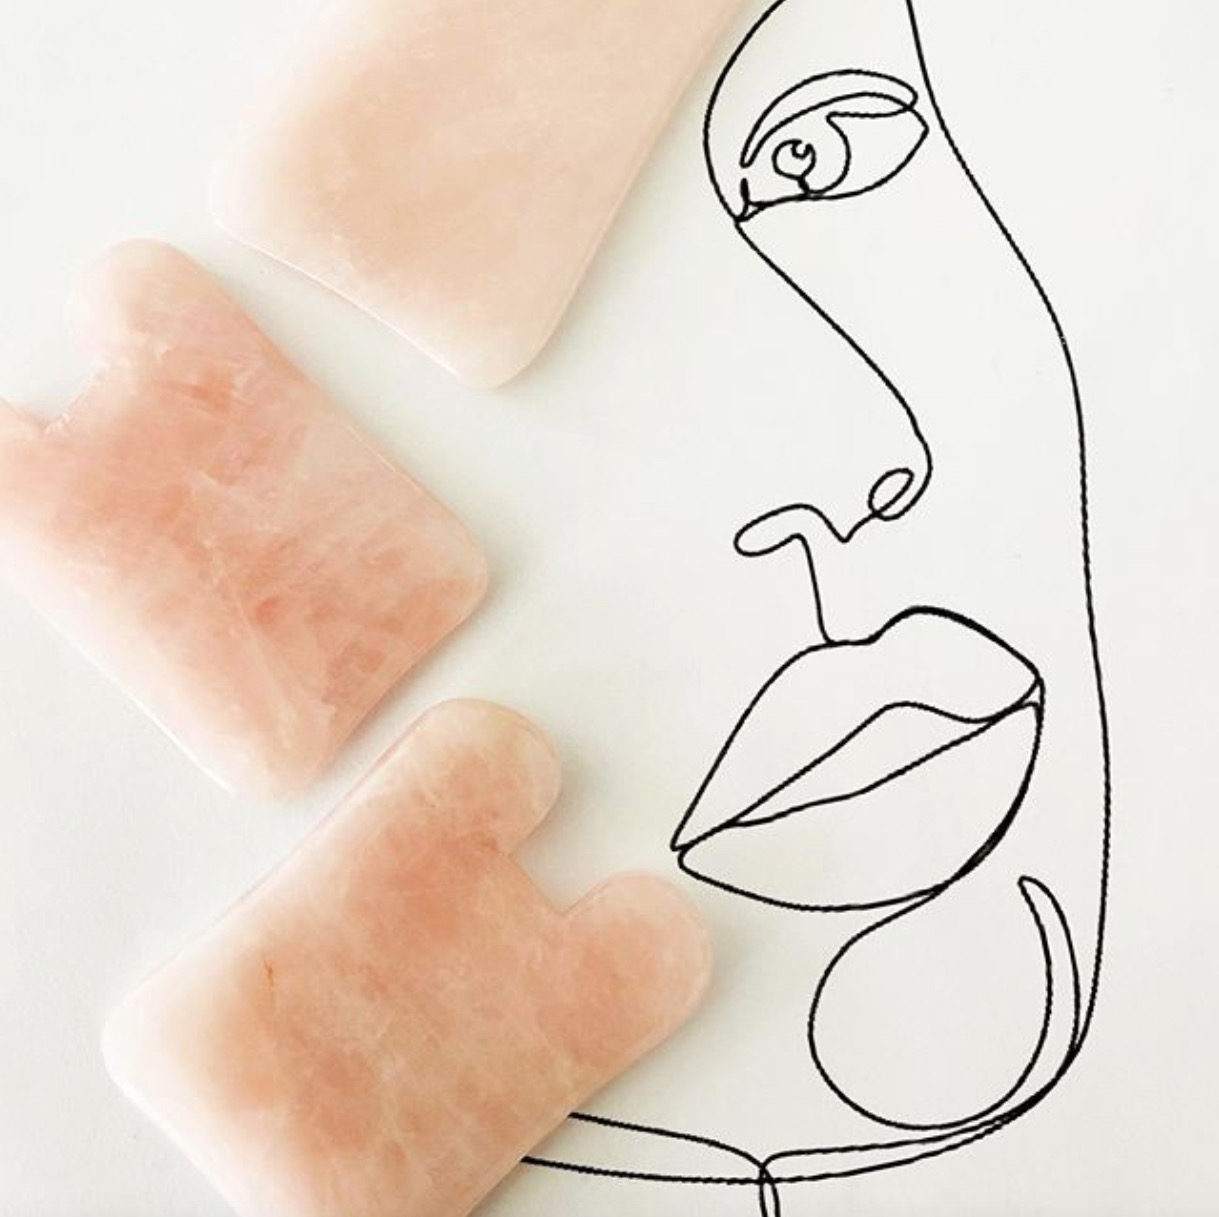 【Get into the “pink” of condition】 Introduce some rose quartz into your self-care routine to reap its healing properties and high-vibrational love energy